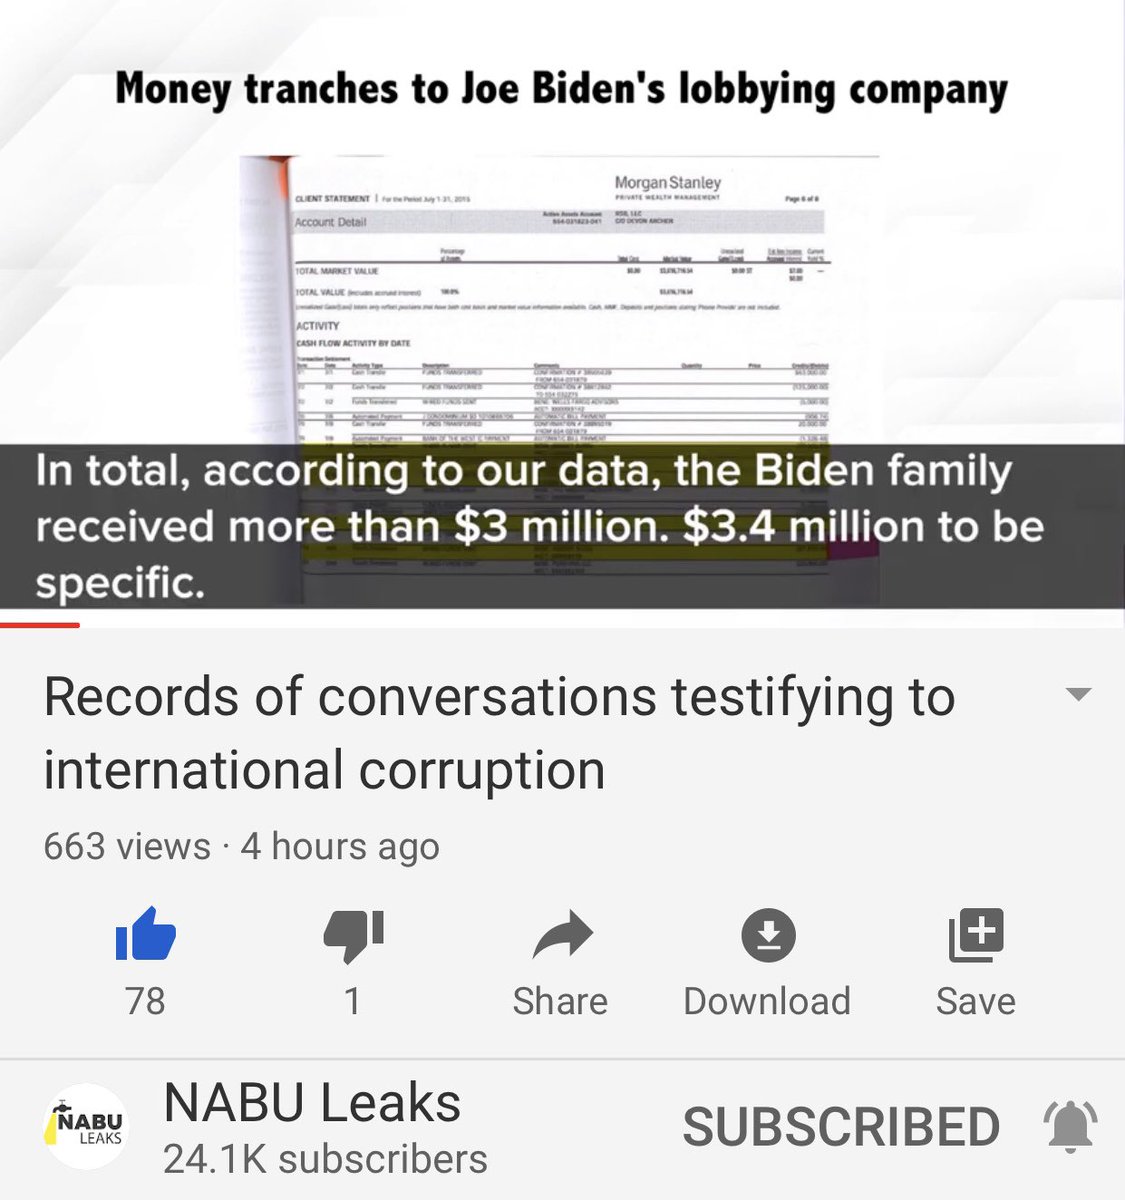 Here’s where they discussed that Biden was involved, and the Biden fam recd 3.4 mil and then $ was transferred from Burisma to Rosemont Seneca, who some will recognize....